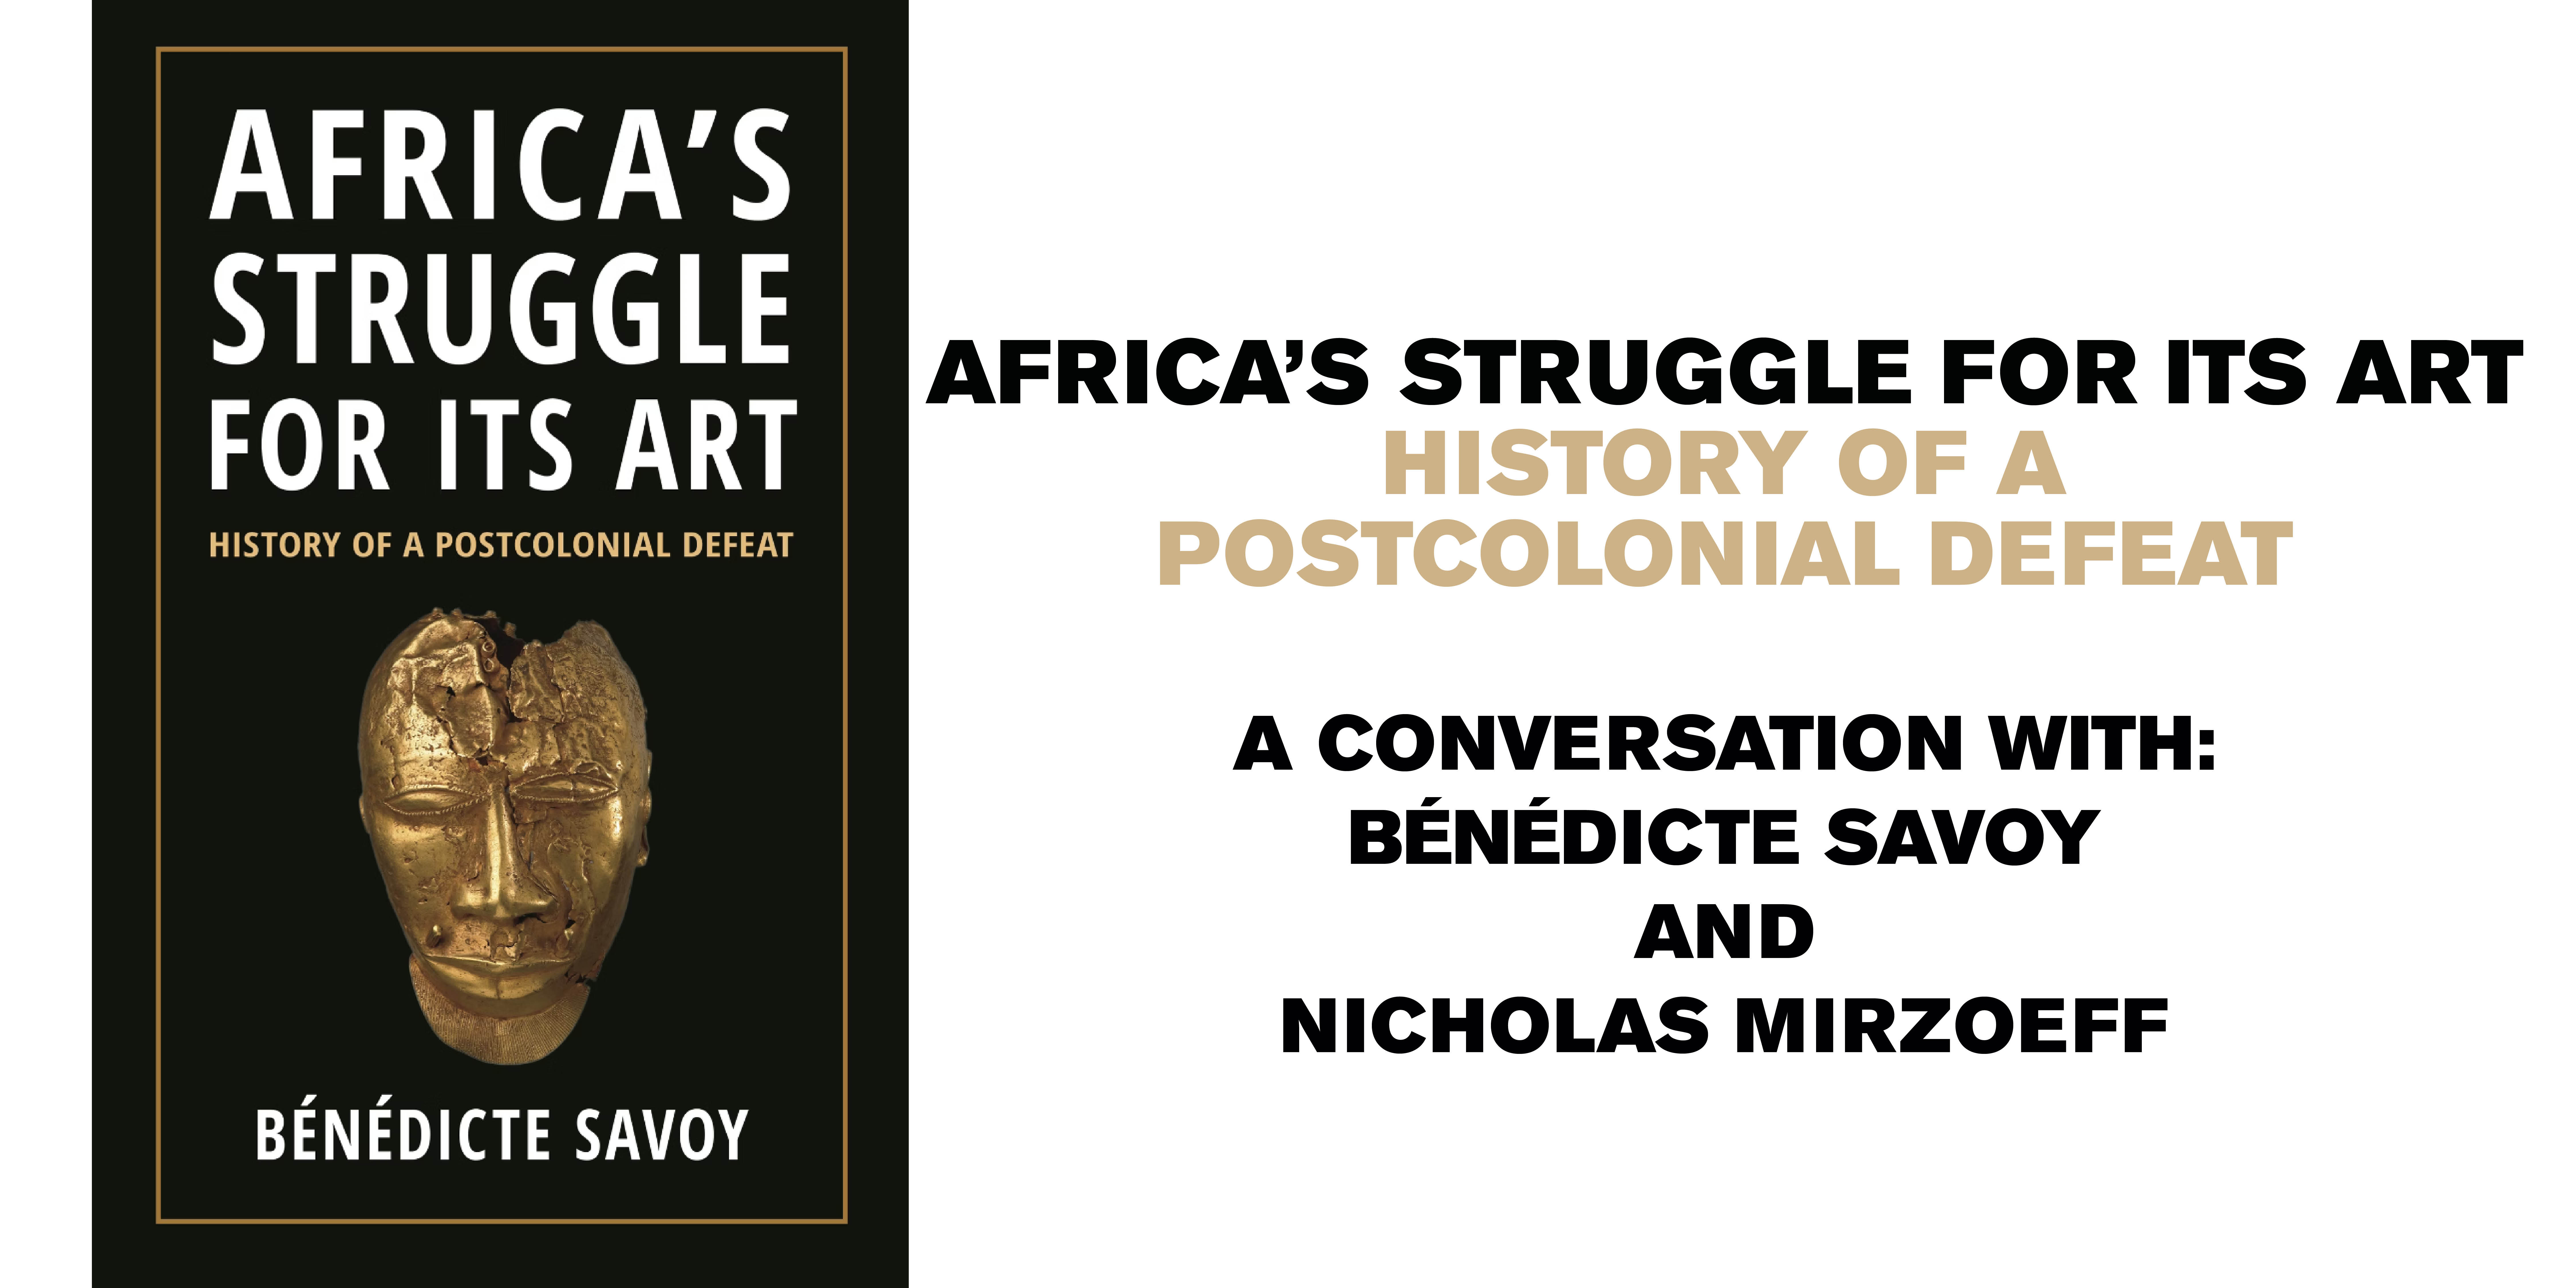 Image depicting the cover of "Africa's Struggle for Its Art" with the depiction of a bronze bust